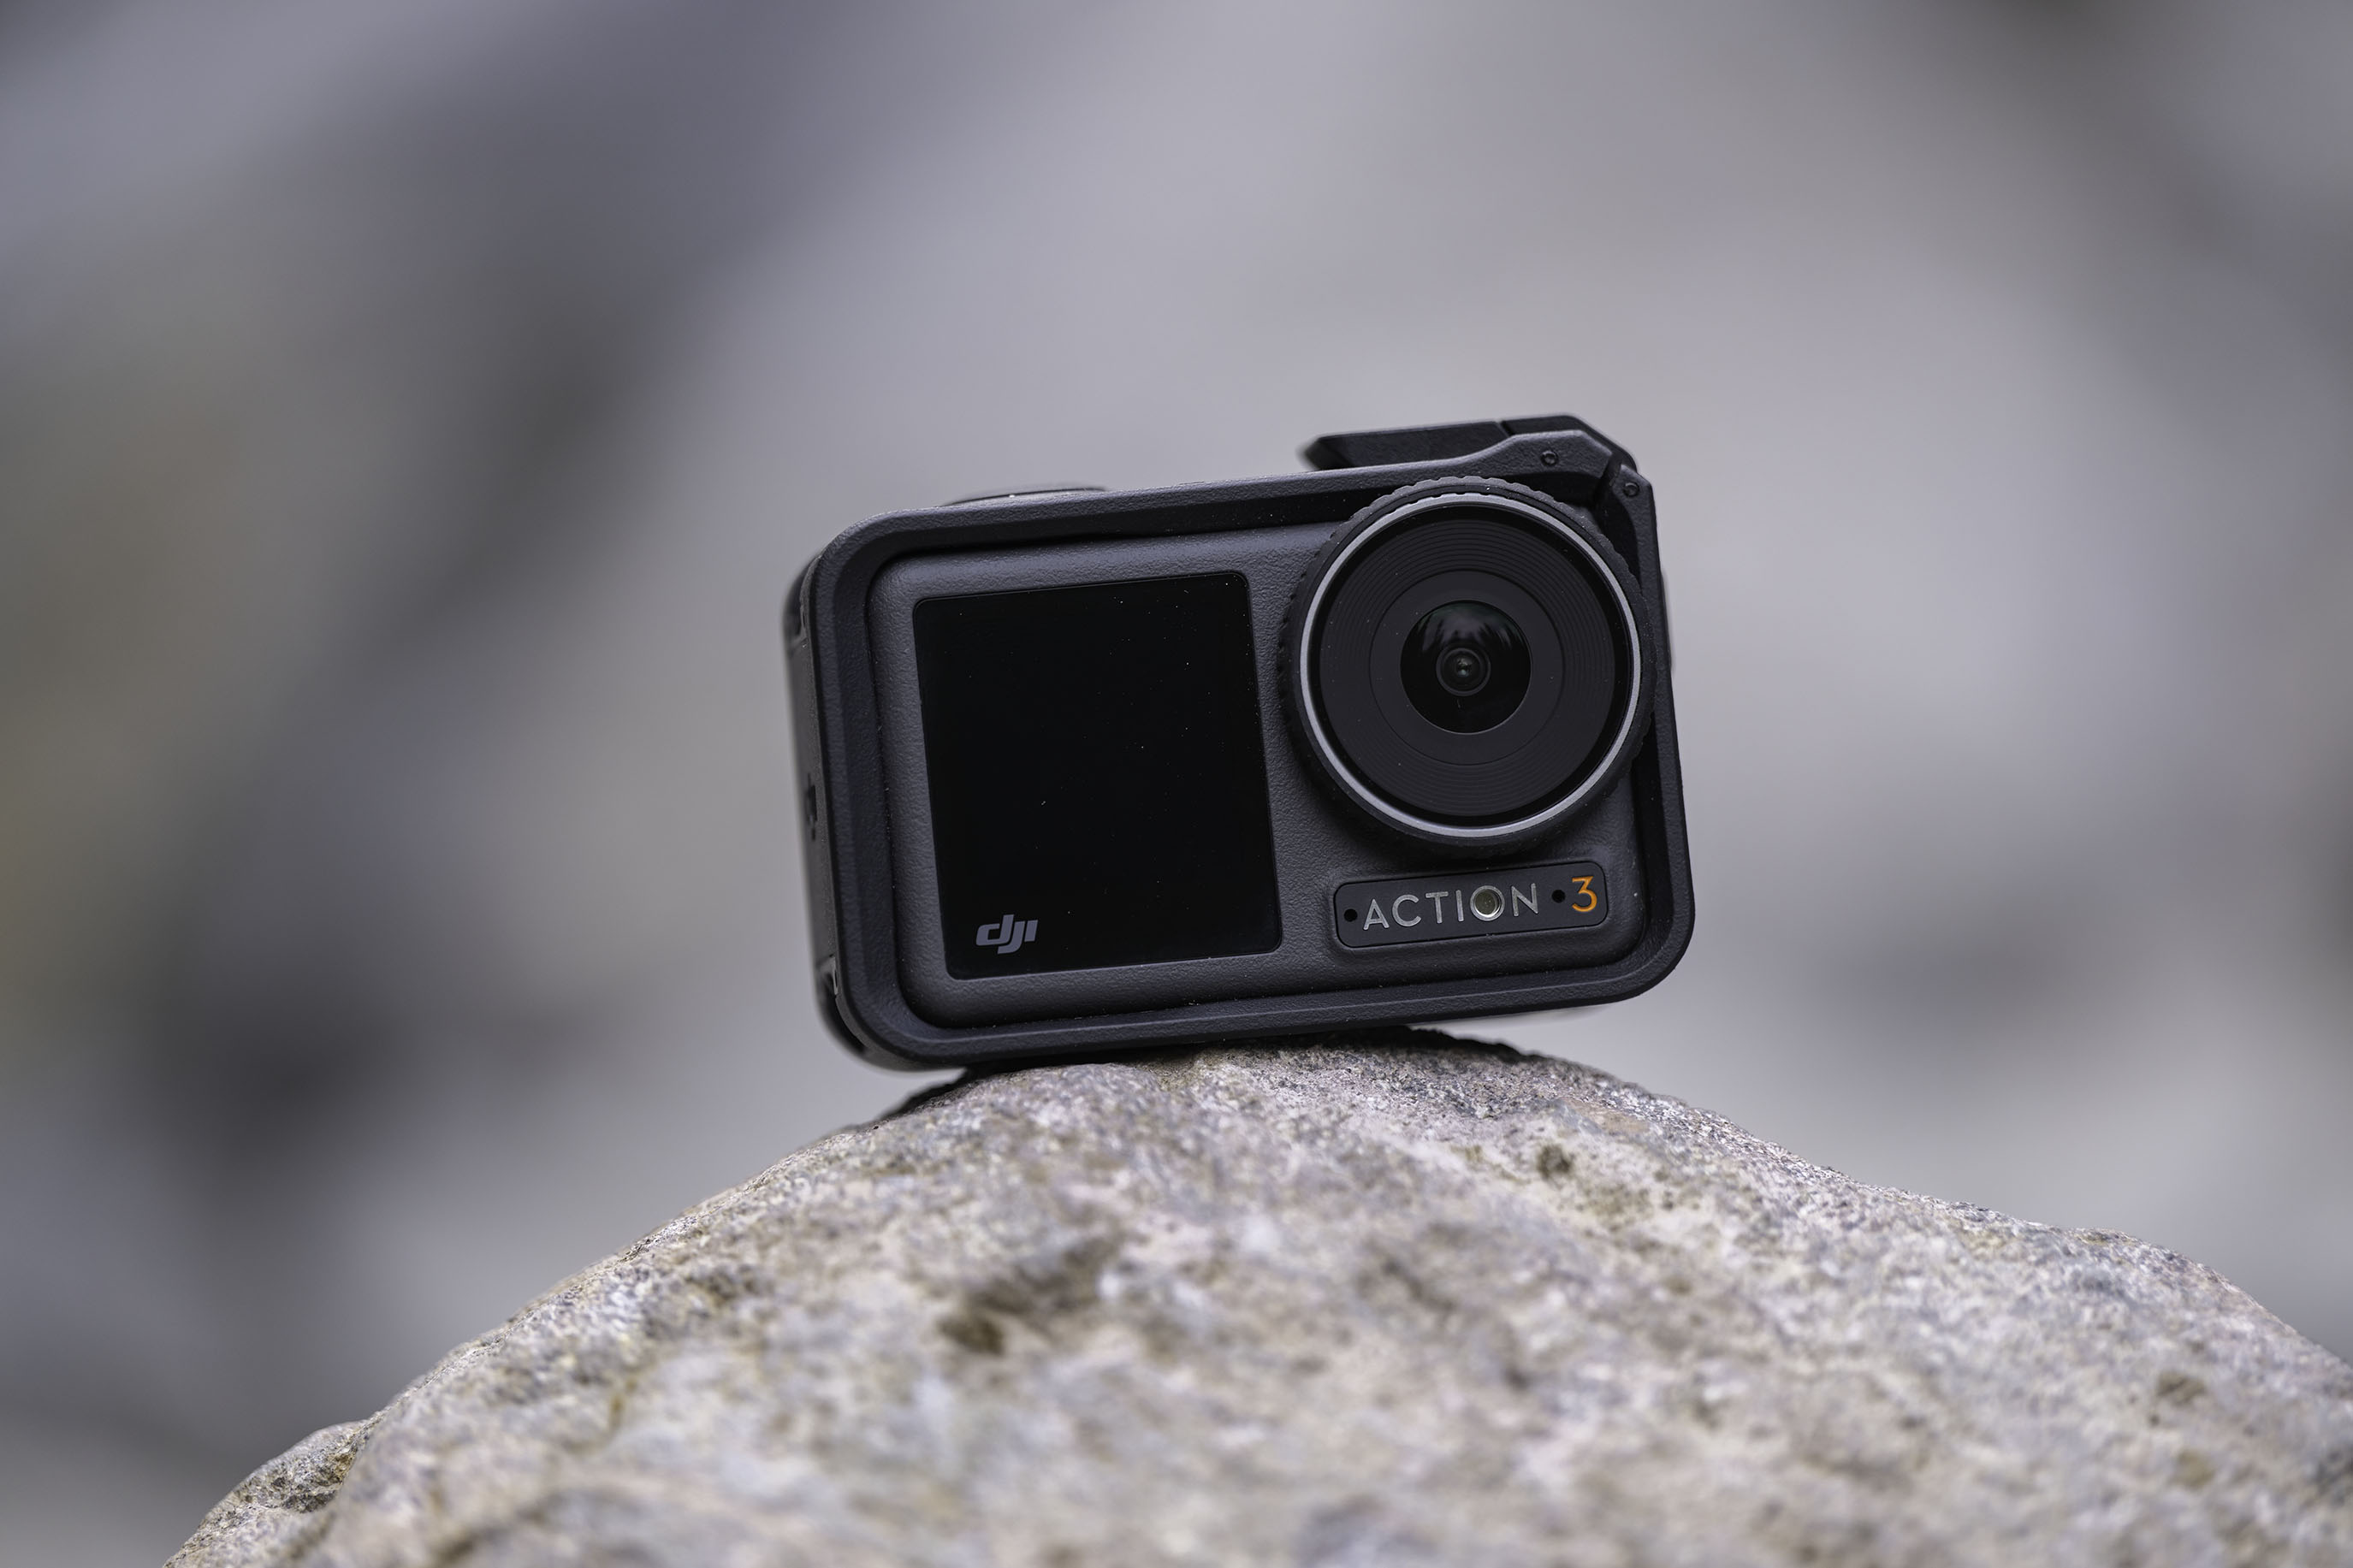 DJI's Osmo Action 4 Action Camera Can Record for 2.5 Hours Straight